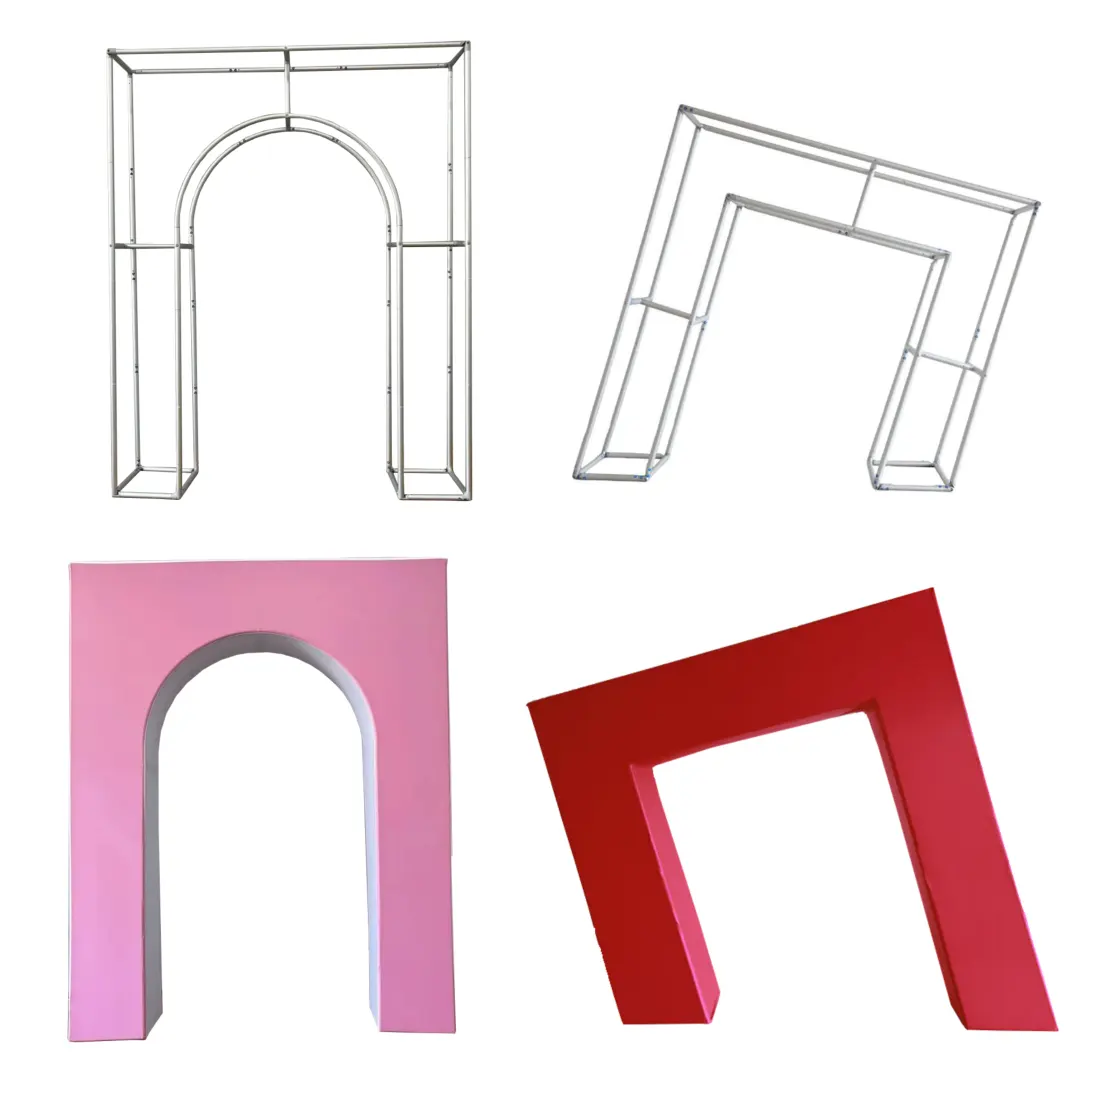 3D Aluminum Alloy Tube Fabric Open Door Arch Backdrop Stand for Birthday Baby Shower Wedding Decorations